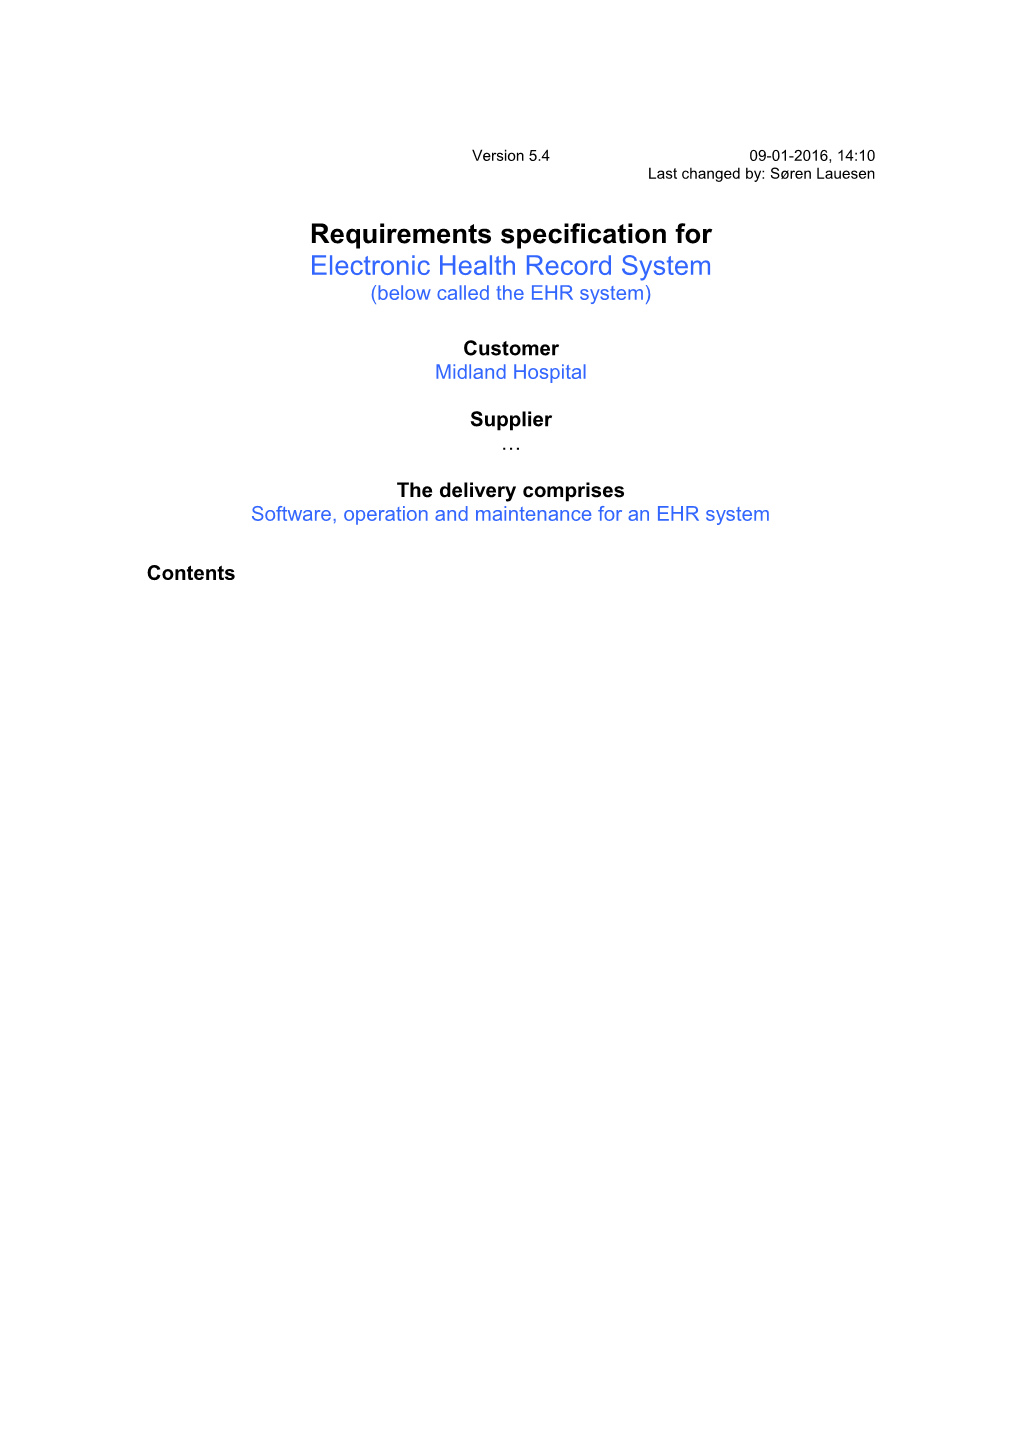 Requirements Template SL-07